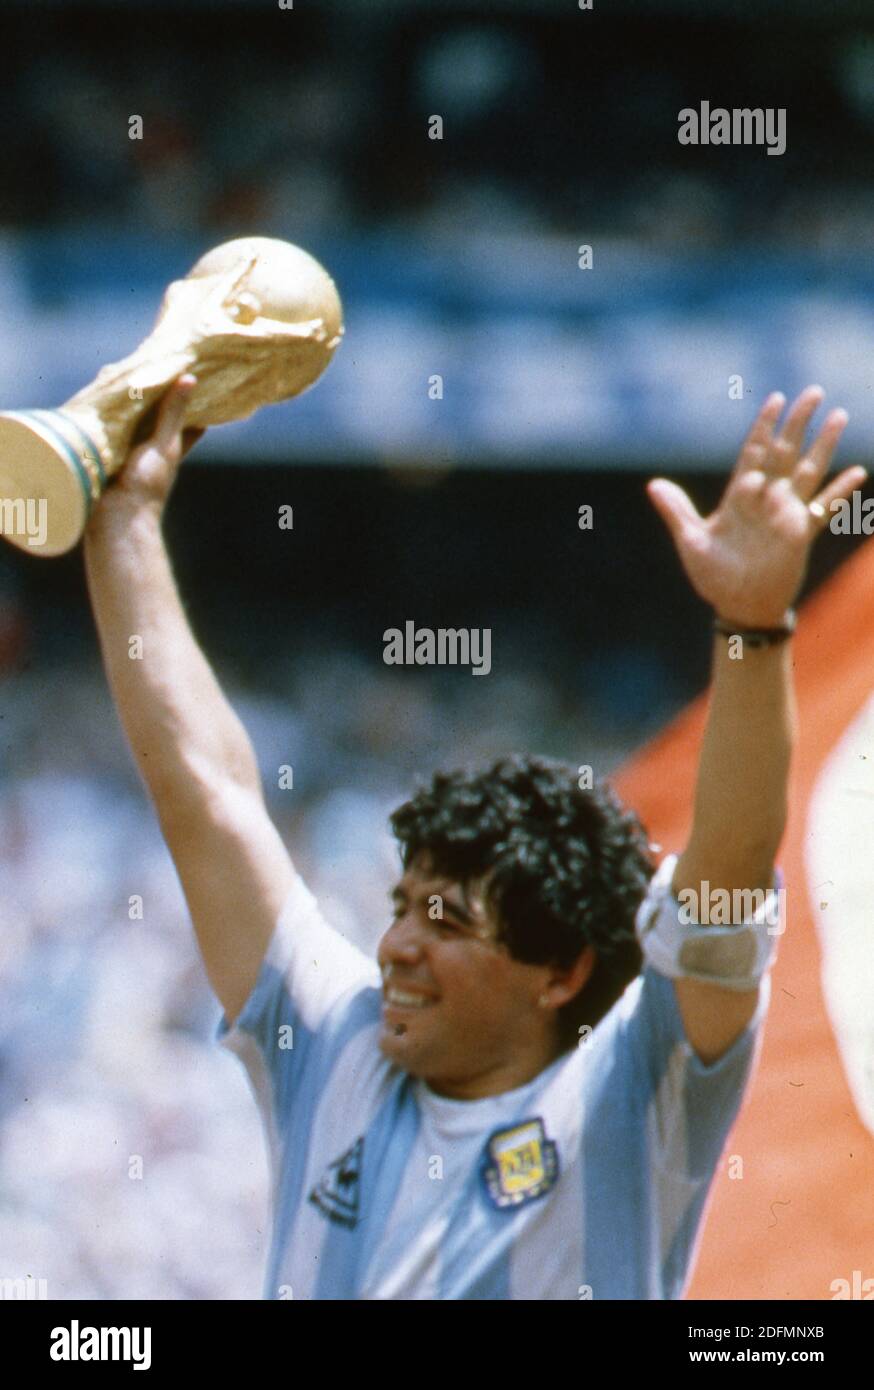 File photo dated June 29, 1986 of Argentine soccer star team captain Diego Armando Maradona displays the World Soccer Cup won by his team after a 3-2 victory over West Germany at the Azteca Stadium in Mexico City. Diego Maradona has died from a heart attack just days after turning 60. The Argentinian football legend died at home, his lawyer said, just two weeks after having surgery on a blot clot in his brain. Widely regarded as one of the greatest players of all time on the pitch, his life off the pitch was equally notorious - amid battles with drug and alcohol addiction. Photo by Giuliano Be Stock Photo